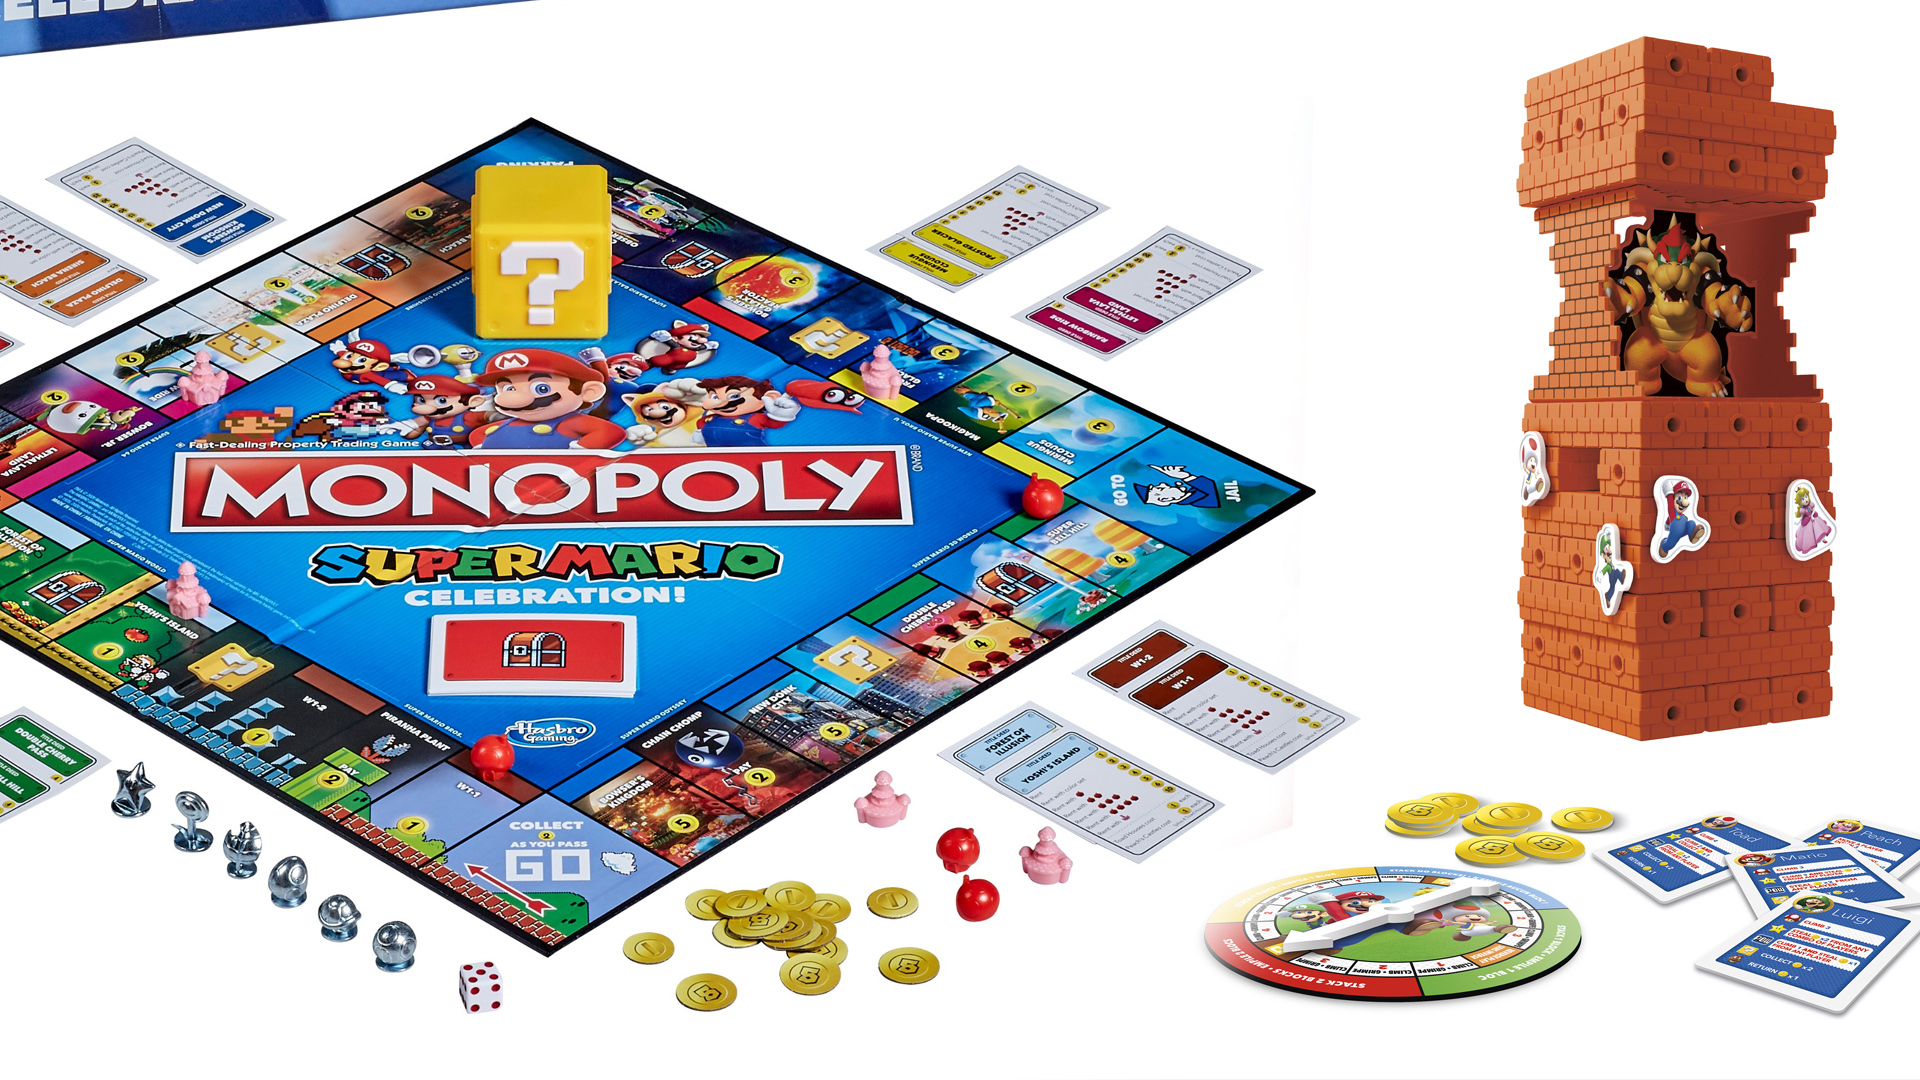 Super Mario Monopoly and Jenga are being released to celebrate the